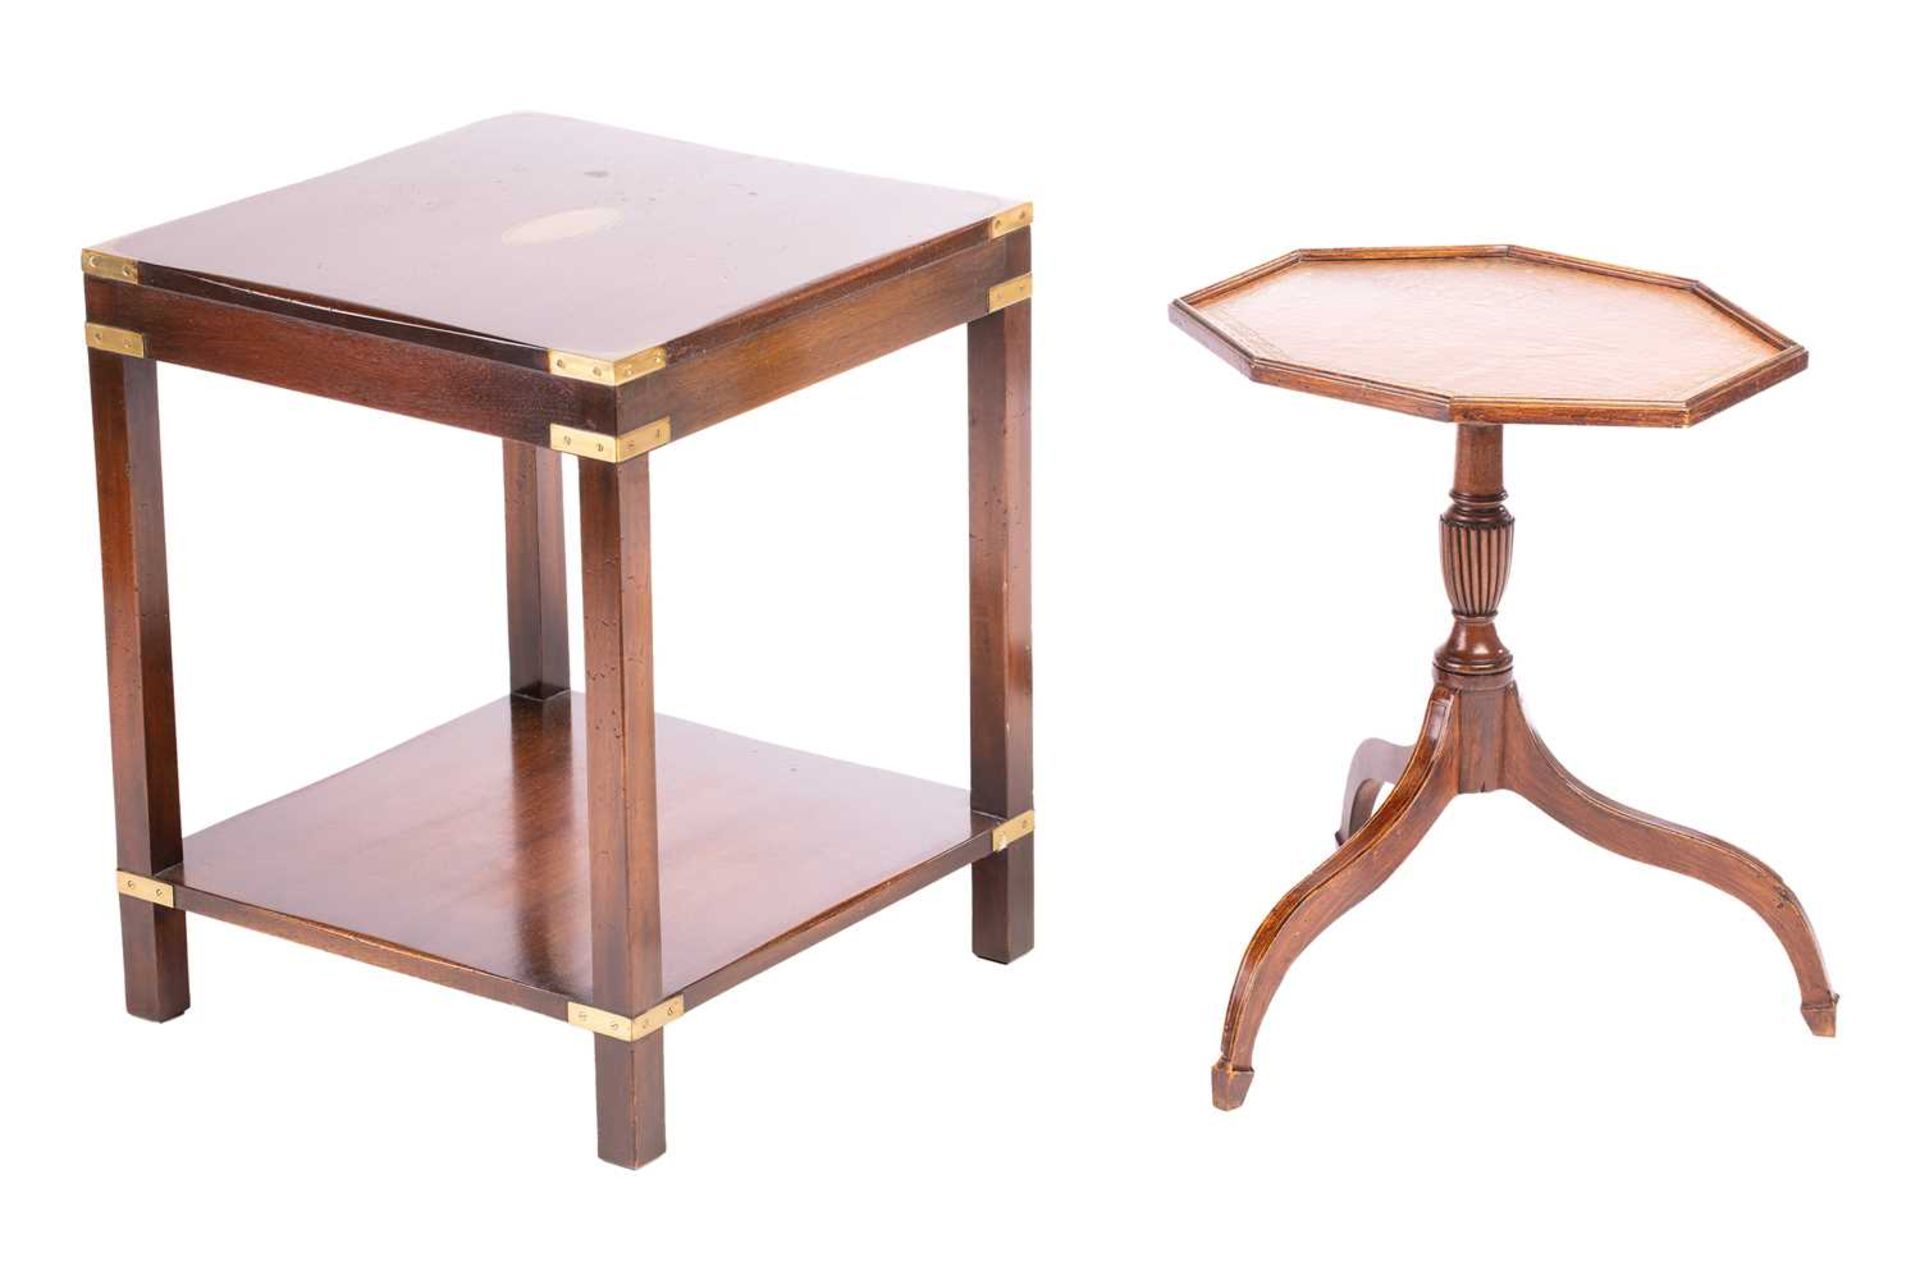 A square Bevan Funnell campaign-style brass-bound mahogany lamp table with under tier, 44 cm x 44 cm - Image 2 of 4